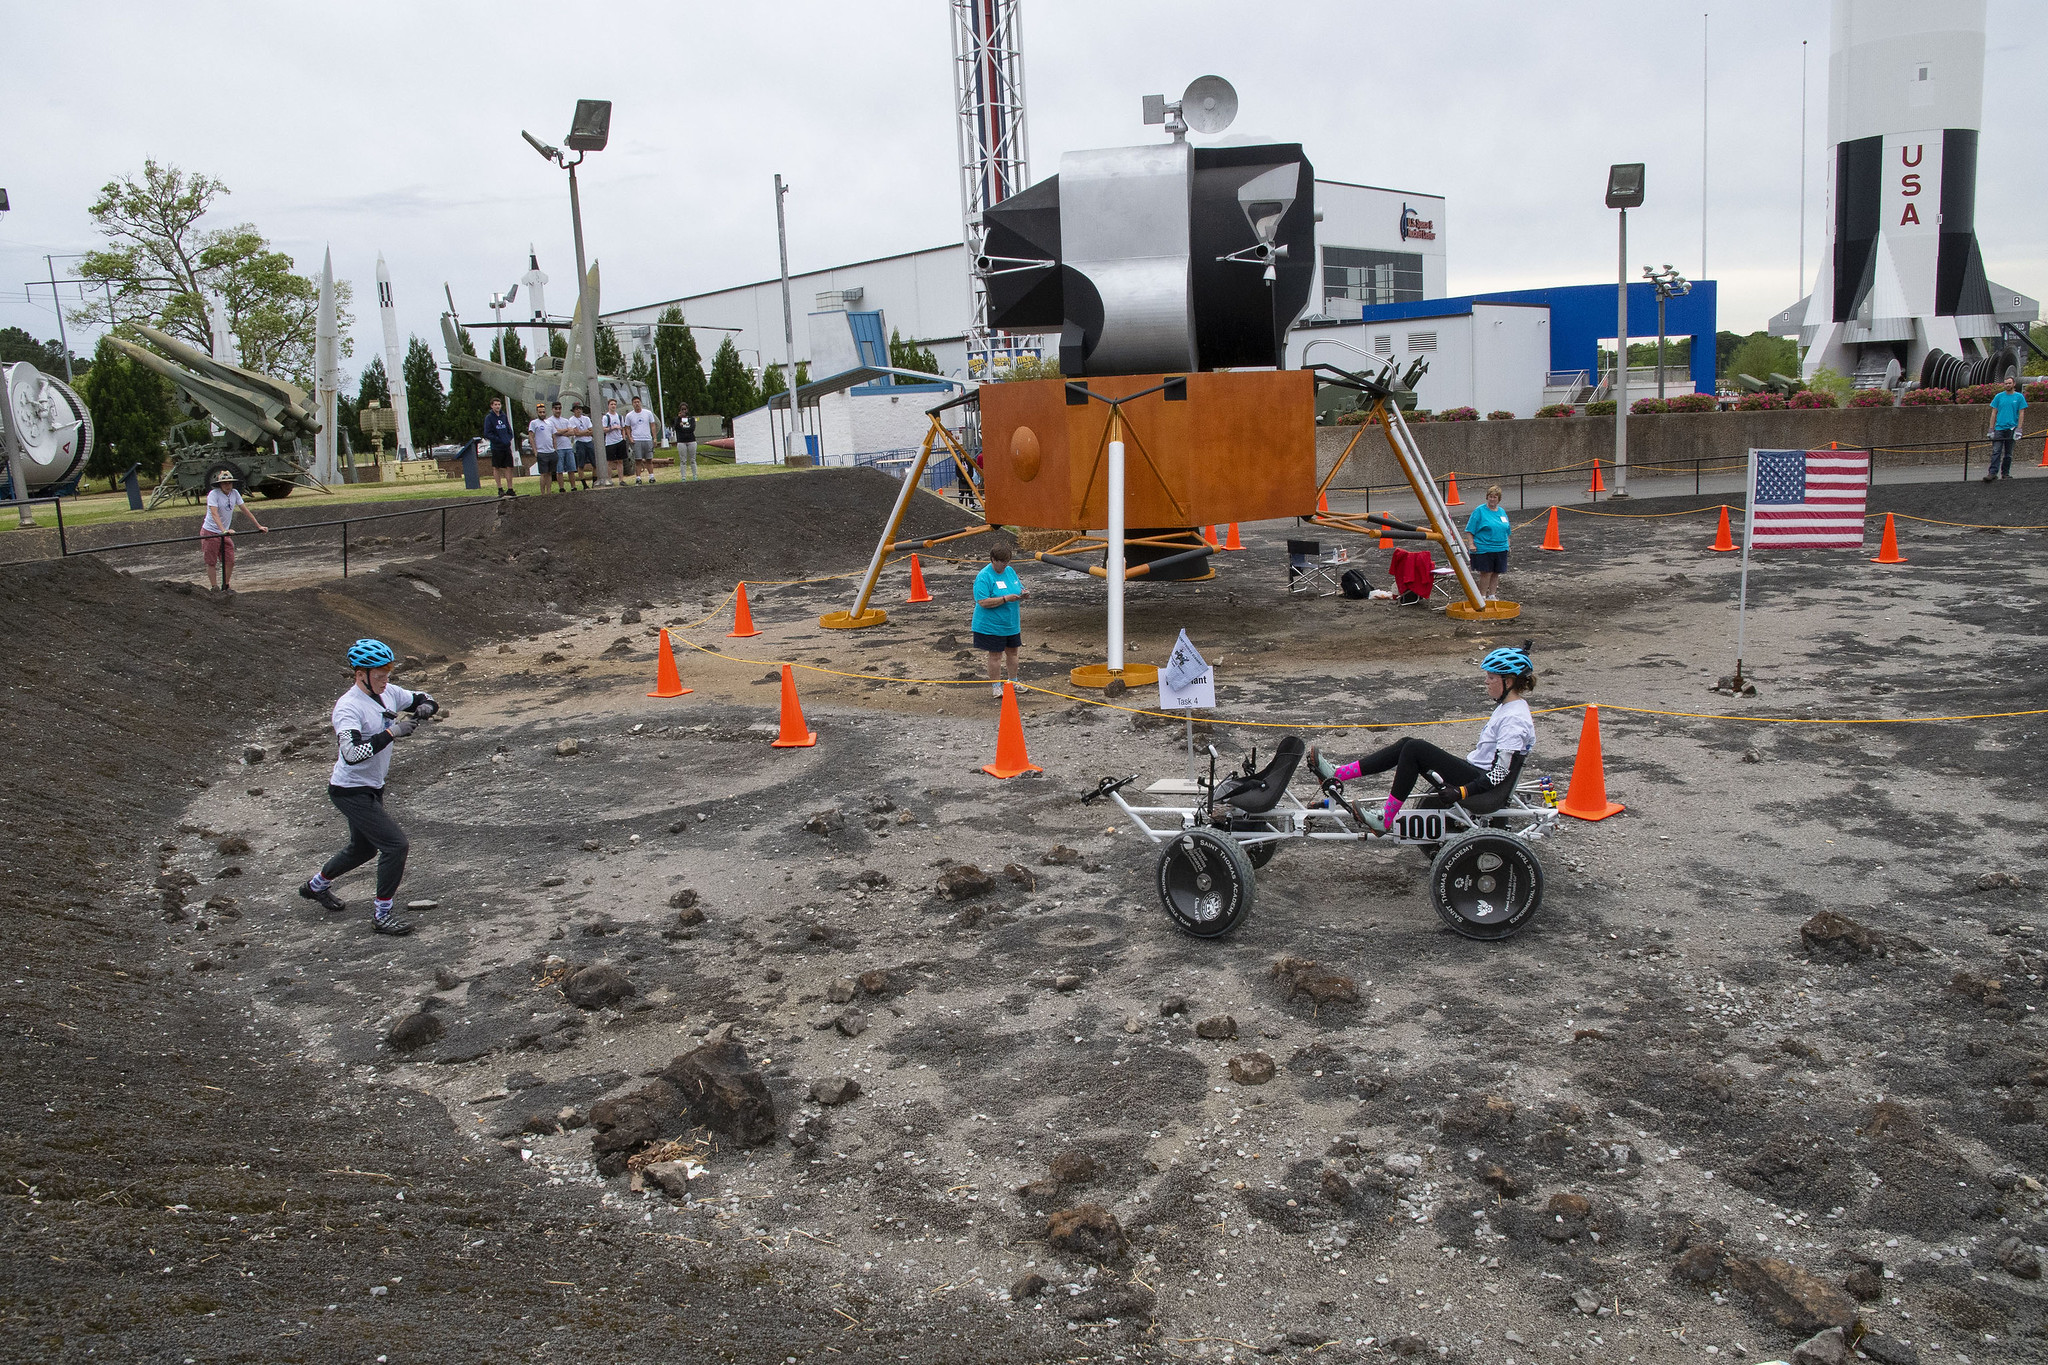 Human Exploration Rover Challenge team on the course during the 2019 event.